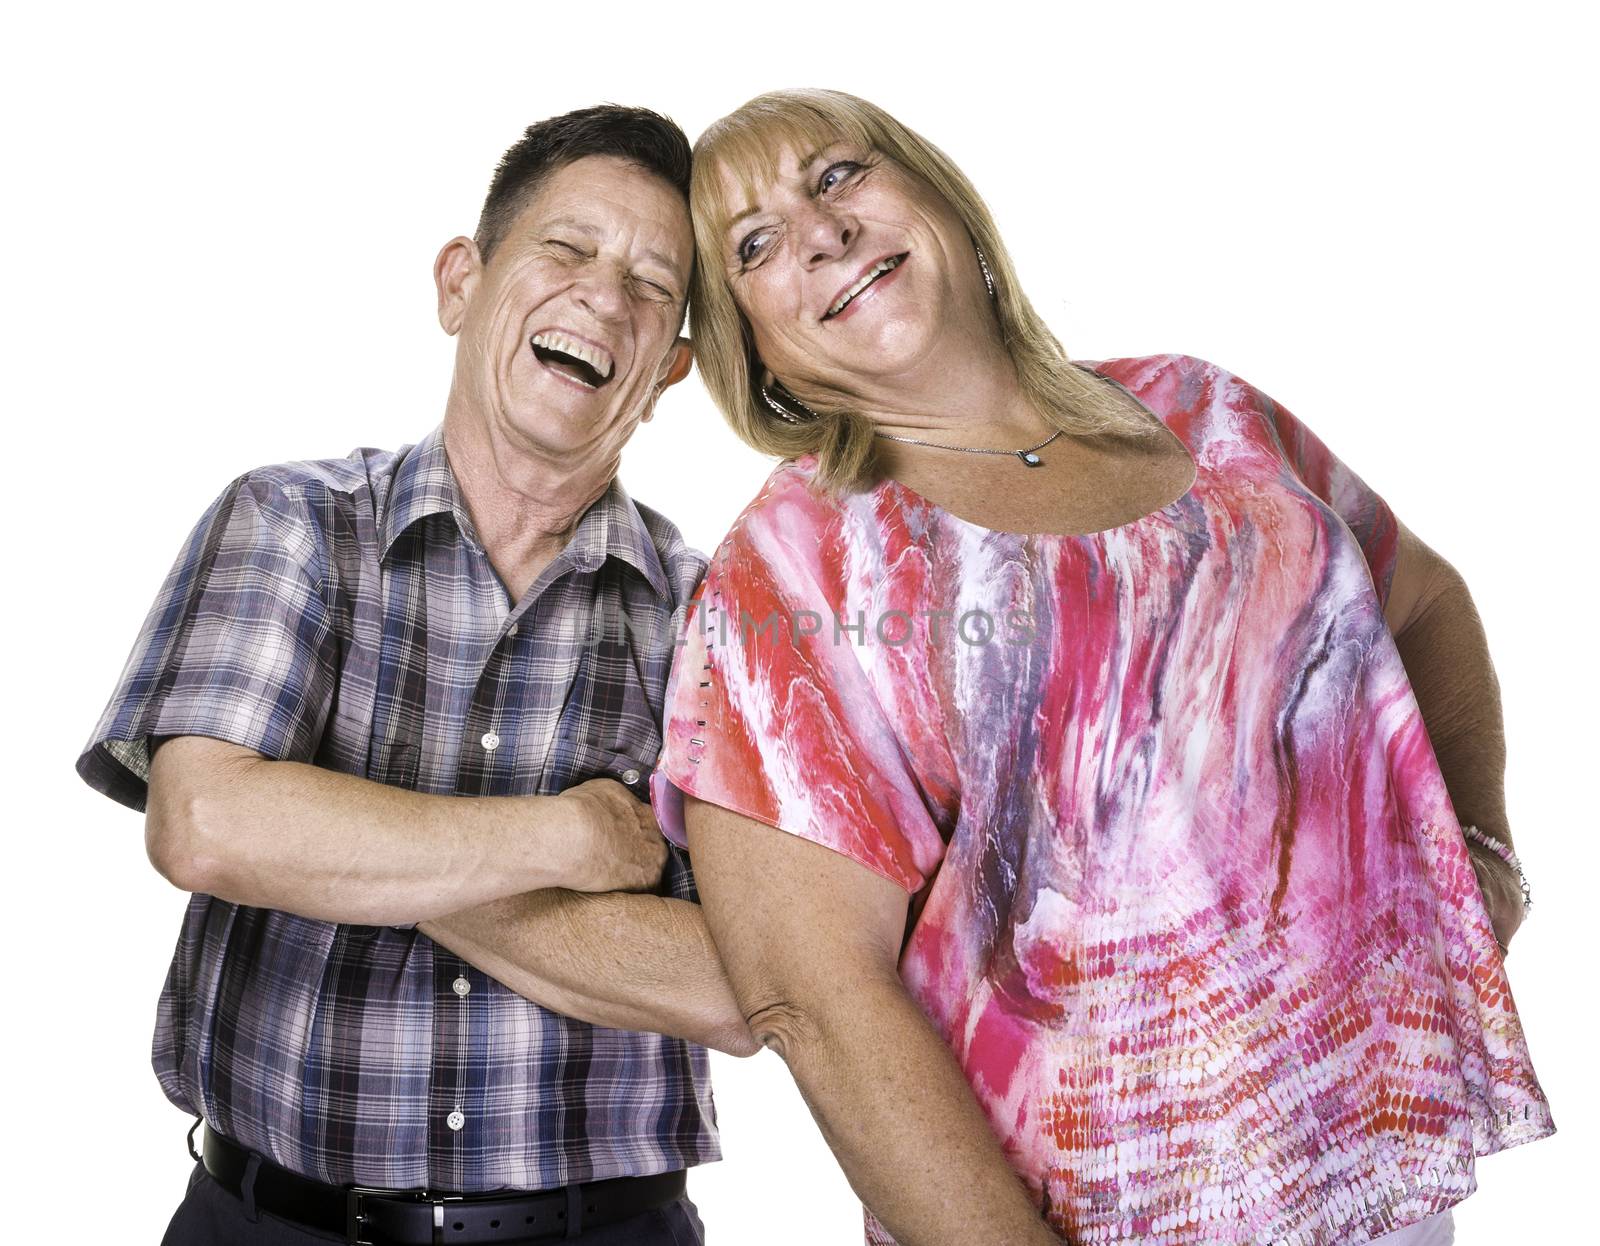 Laughing Transgender Man and Woman by Creatista